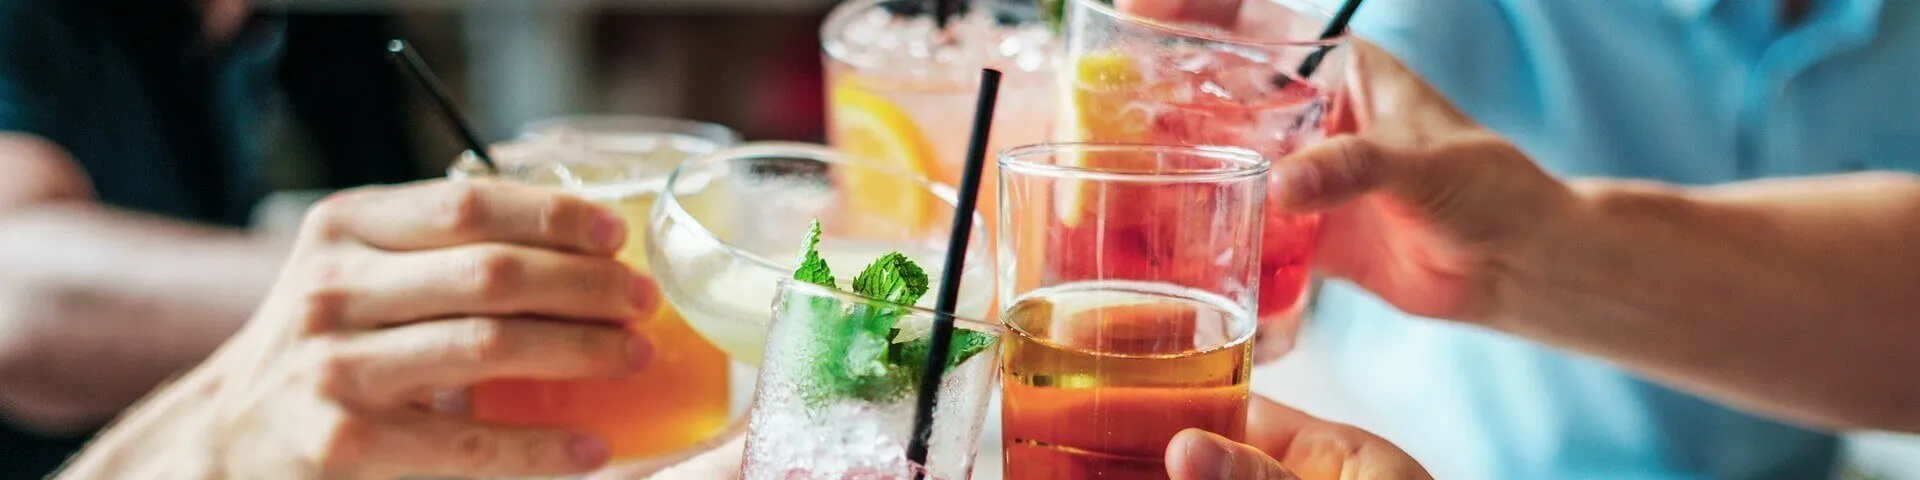 7 Amazing Drink Ideas with Recipes for a Fun Party Night